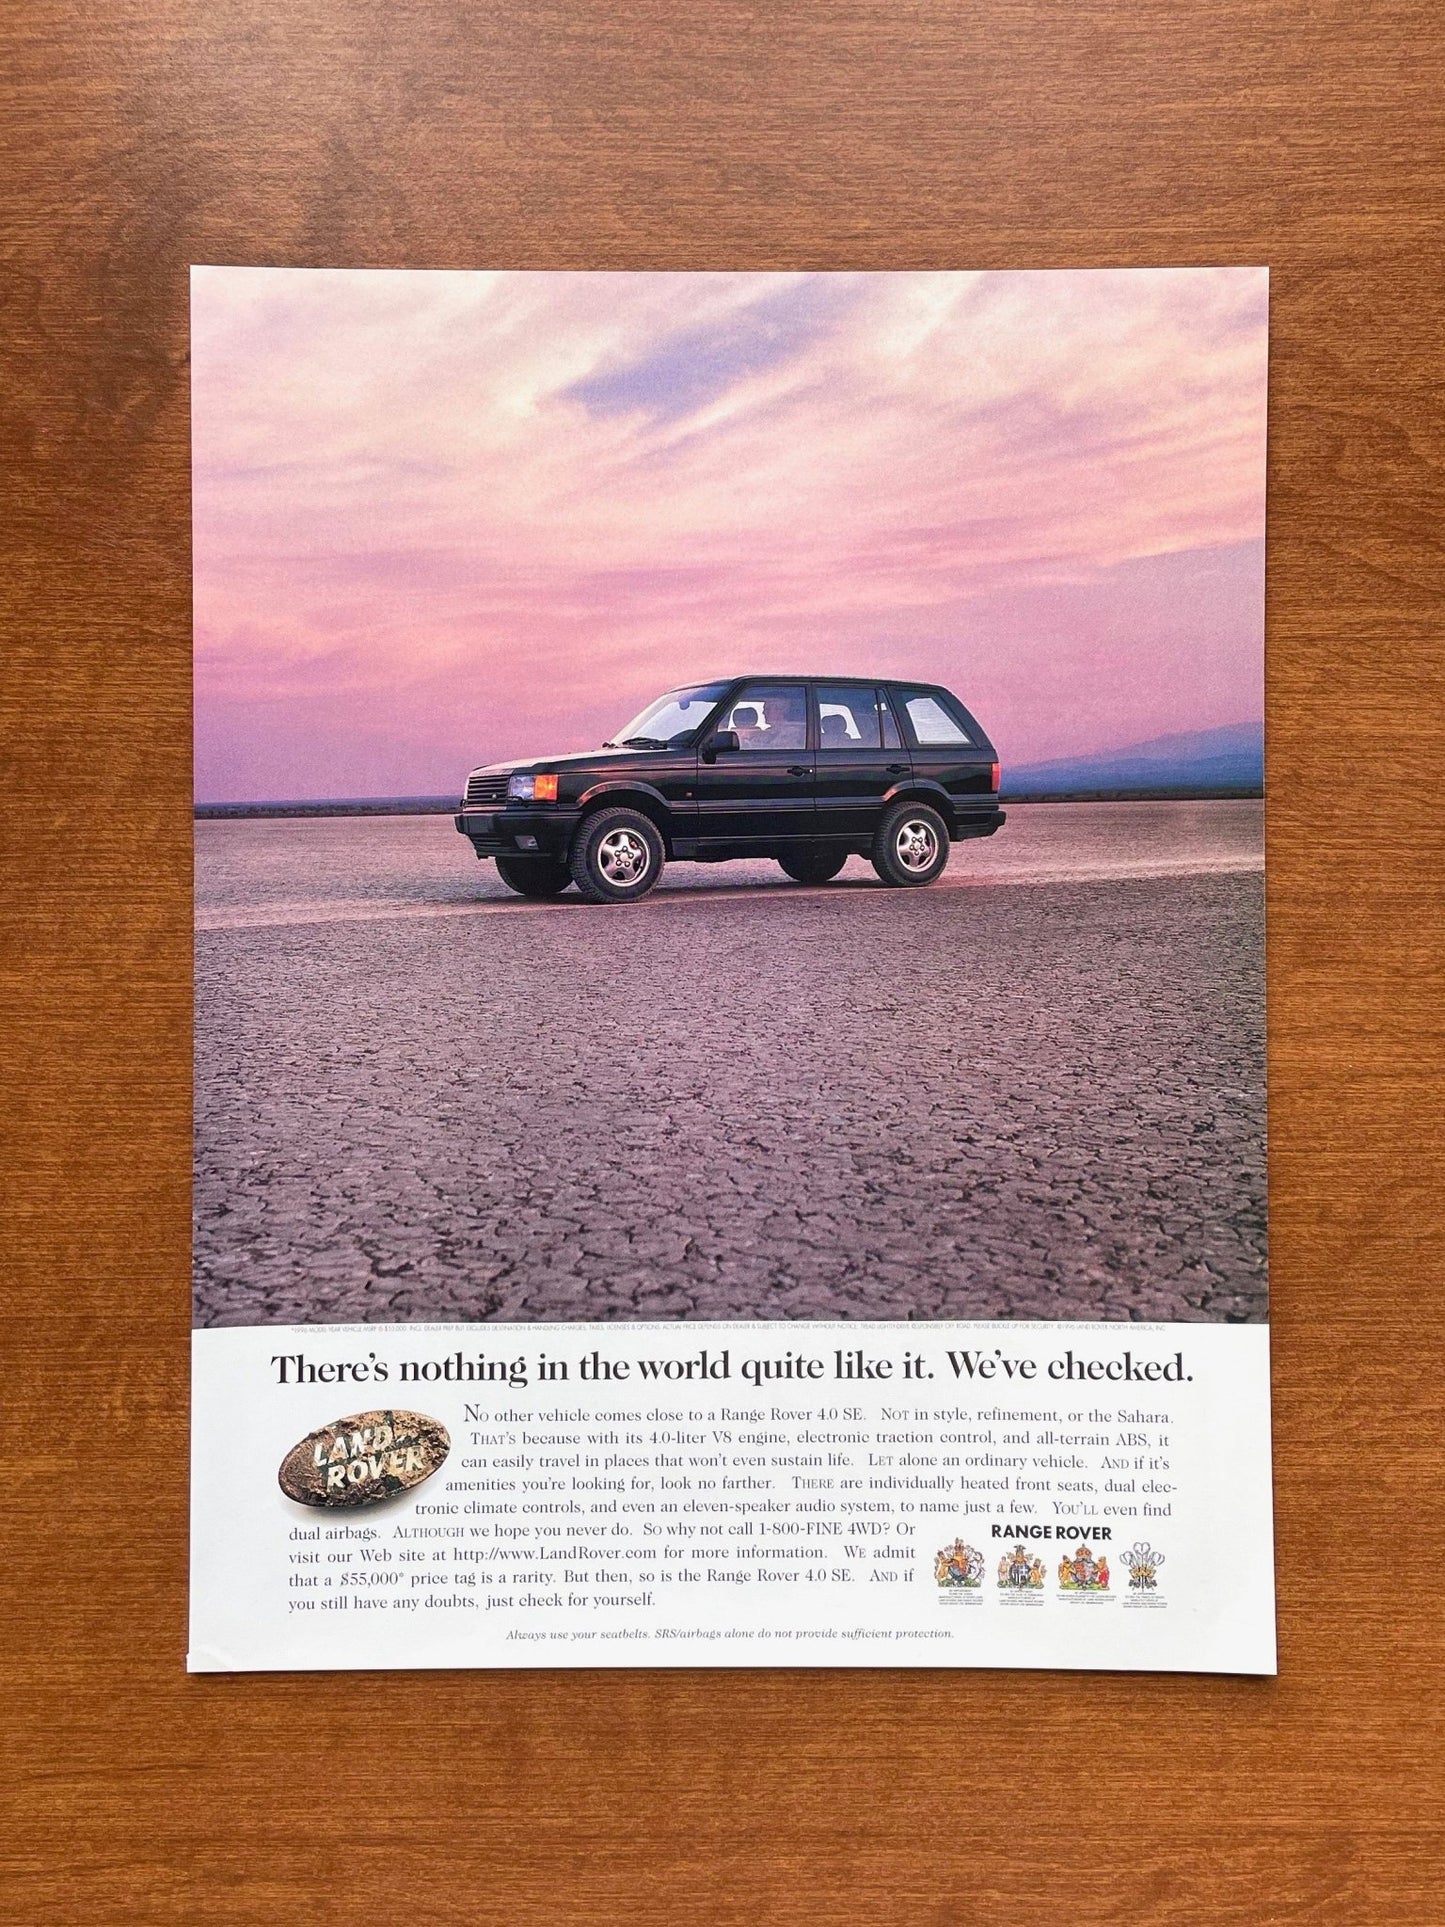 1997 Range Rover 4.0 SE "nothing in the world like it." Advertisement